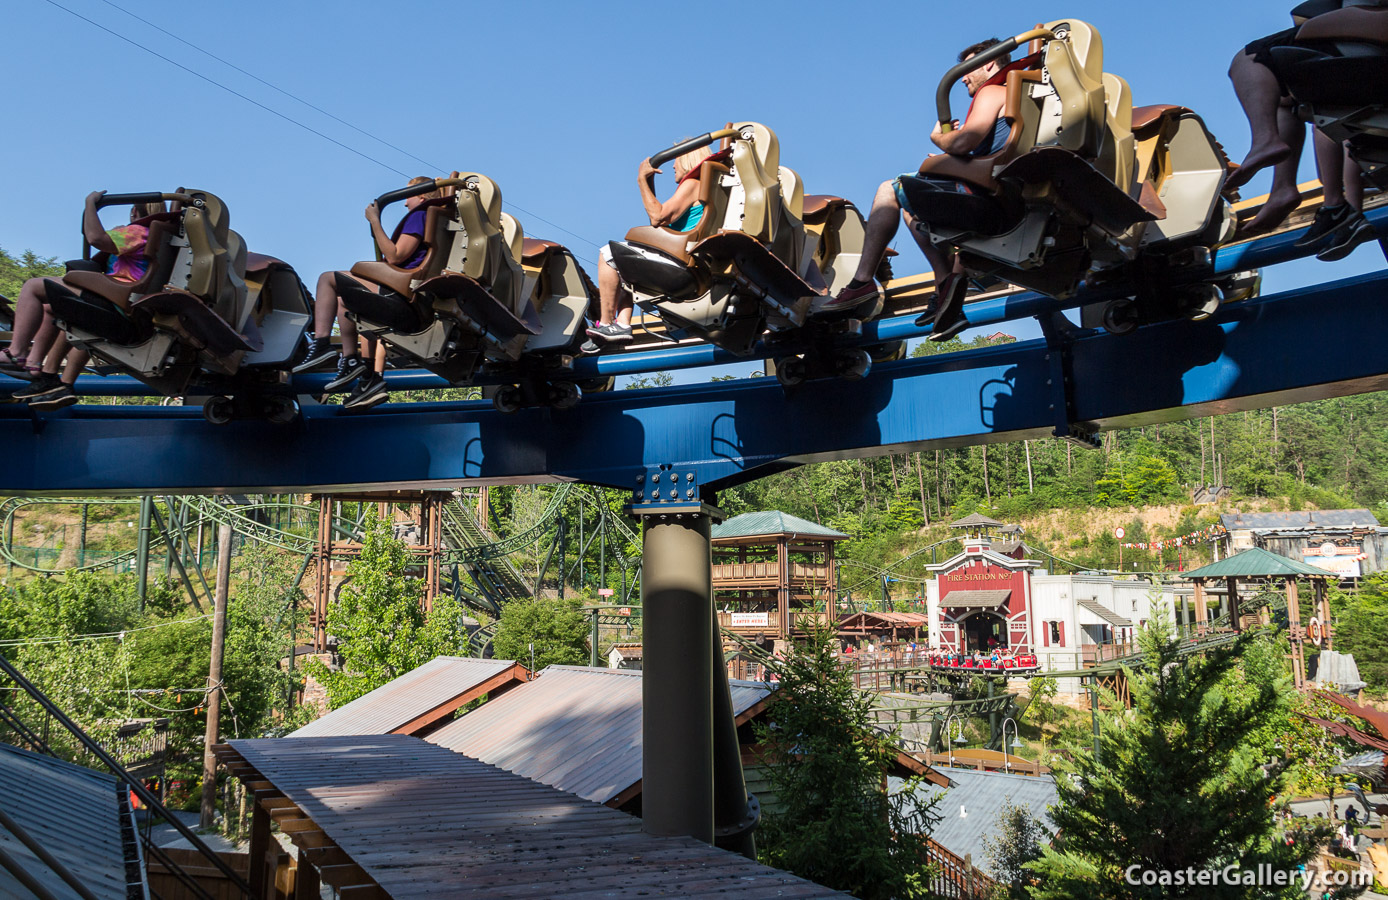 Train and restraint systems on the Wild Eagle roller coaster